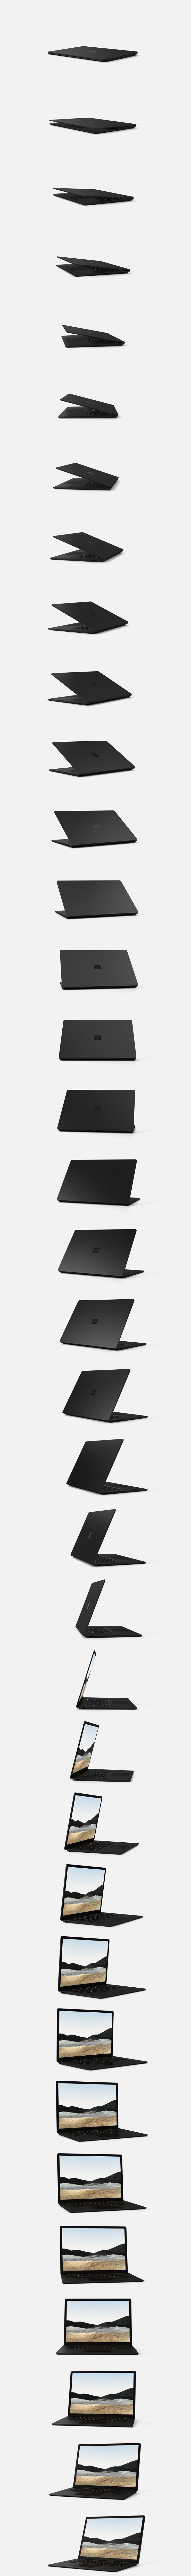 Surface Laptop 4 for Business.